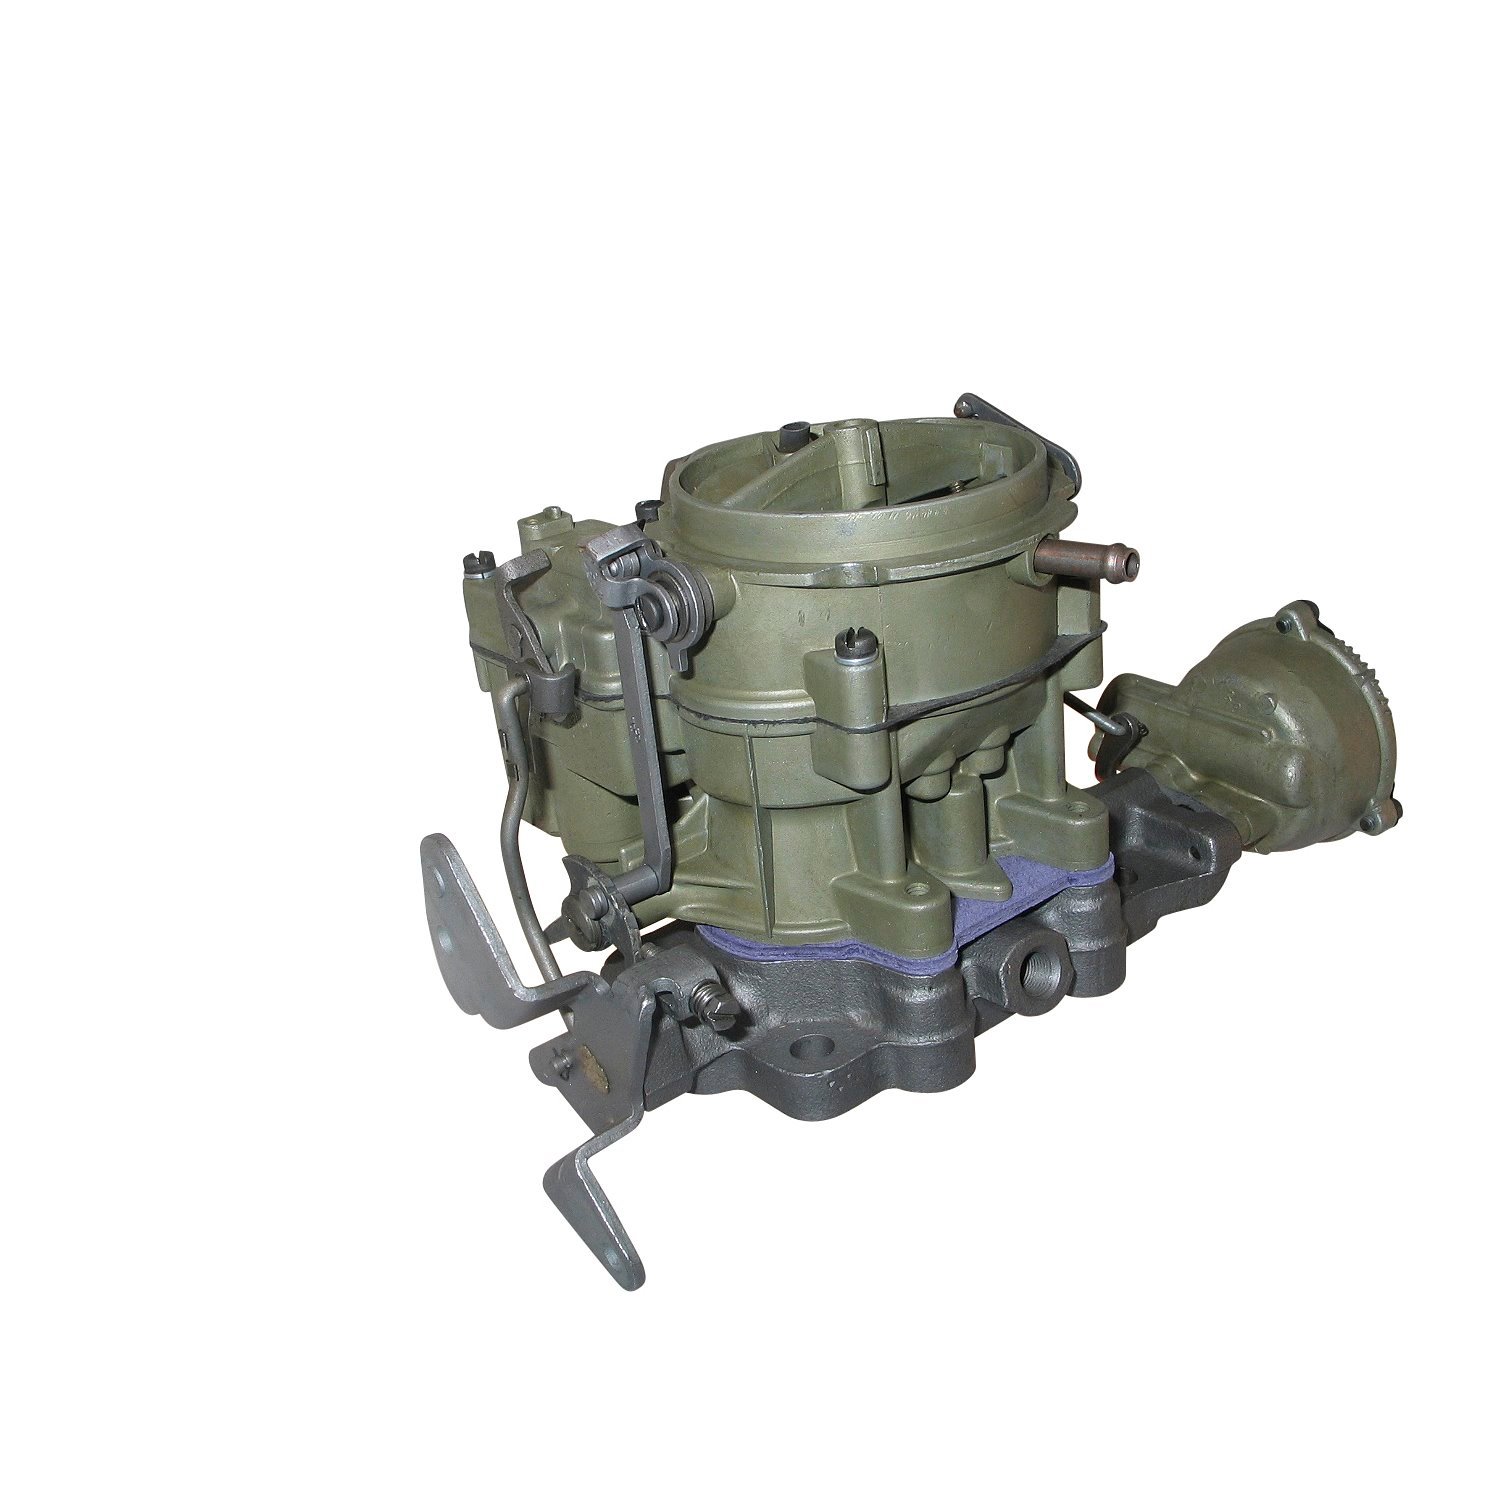 3-392 Rochester Remanufactured Carburetor, 2GC-Style